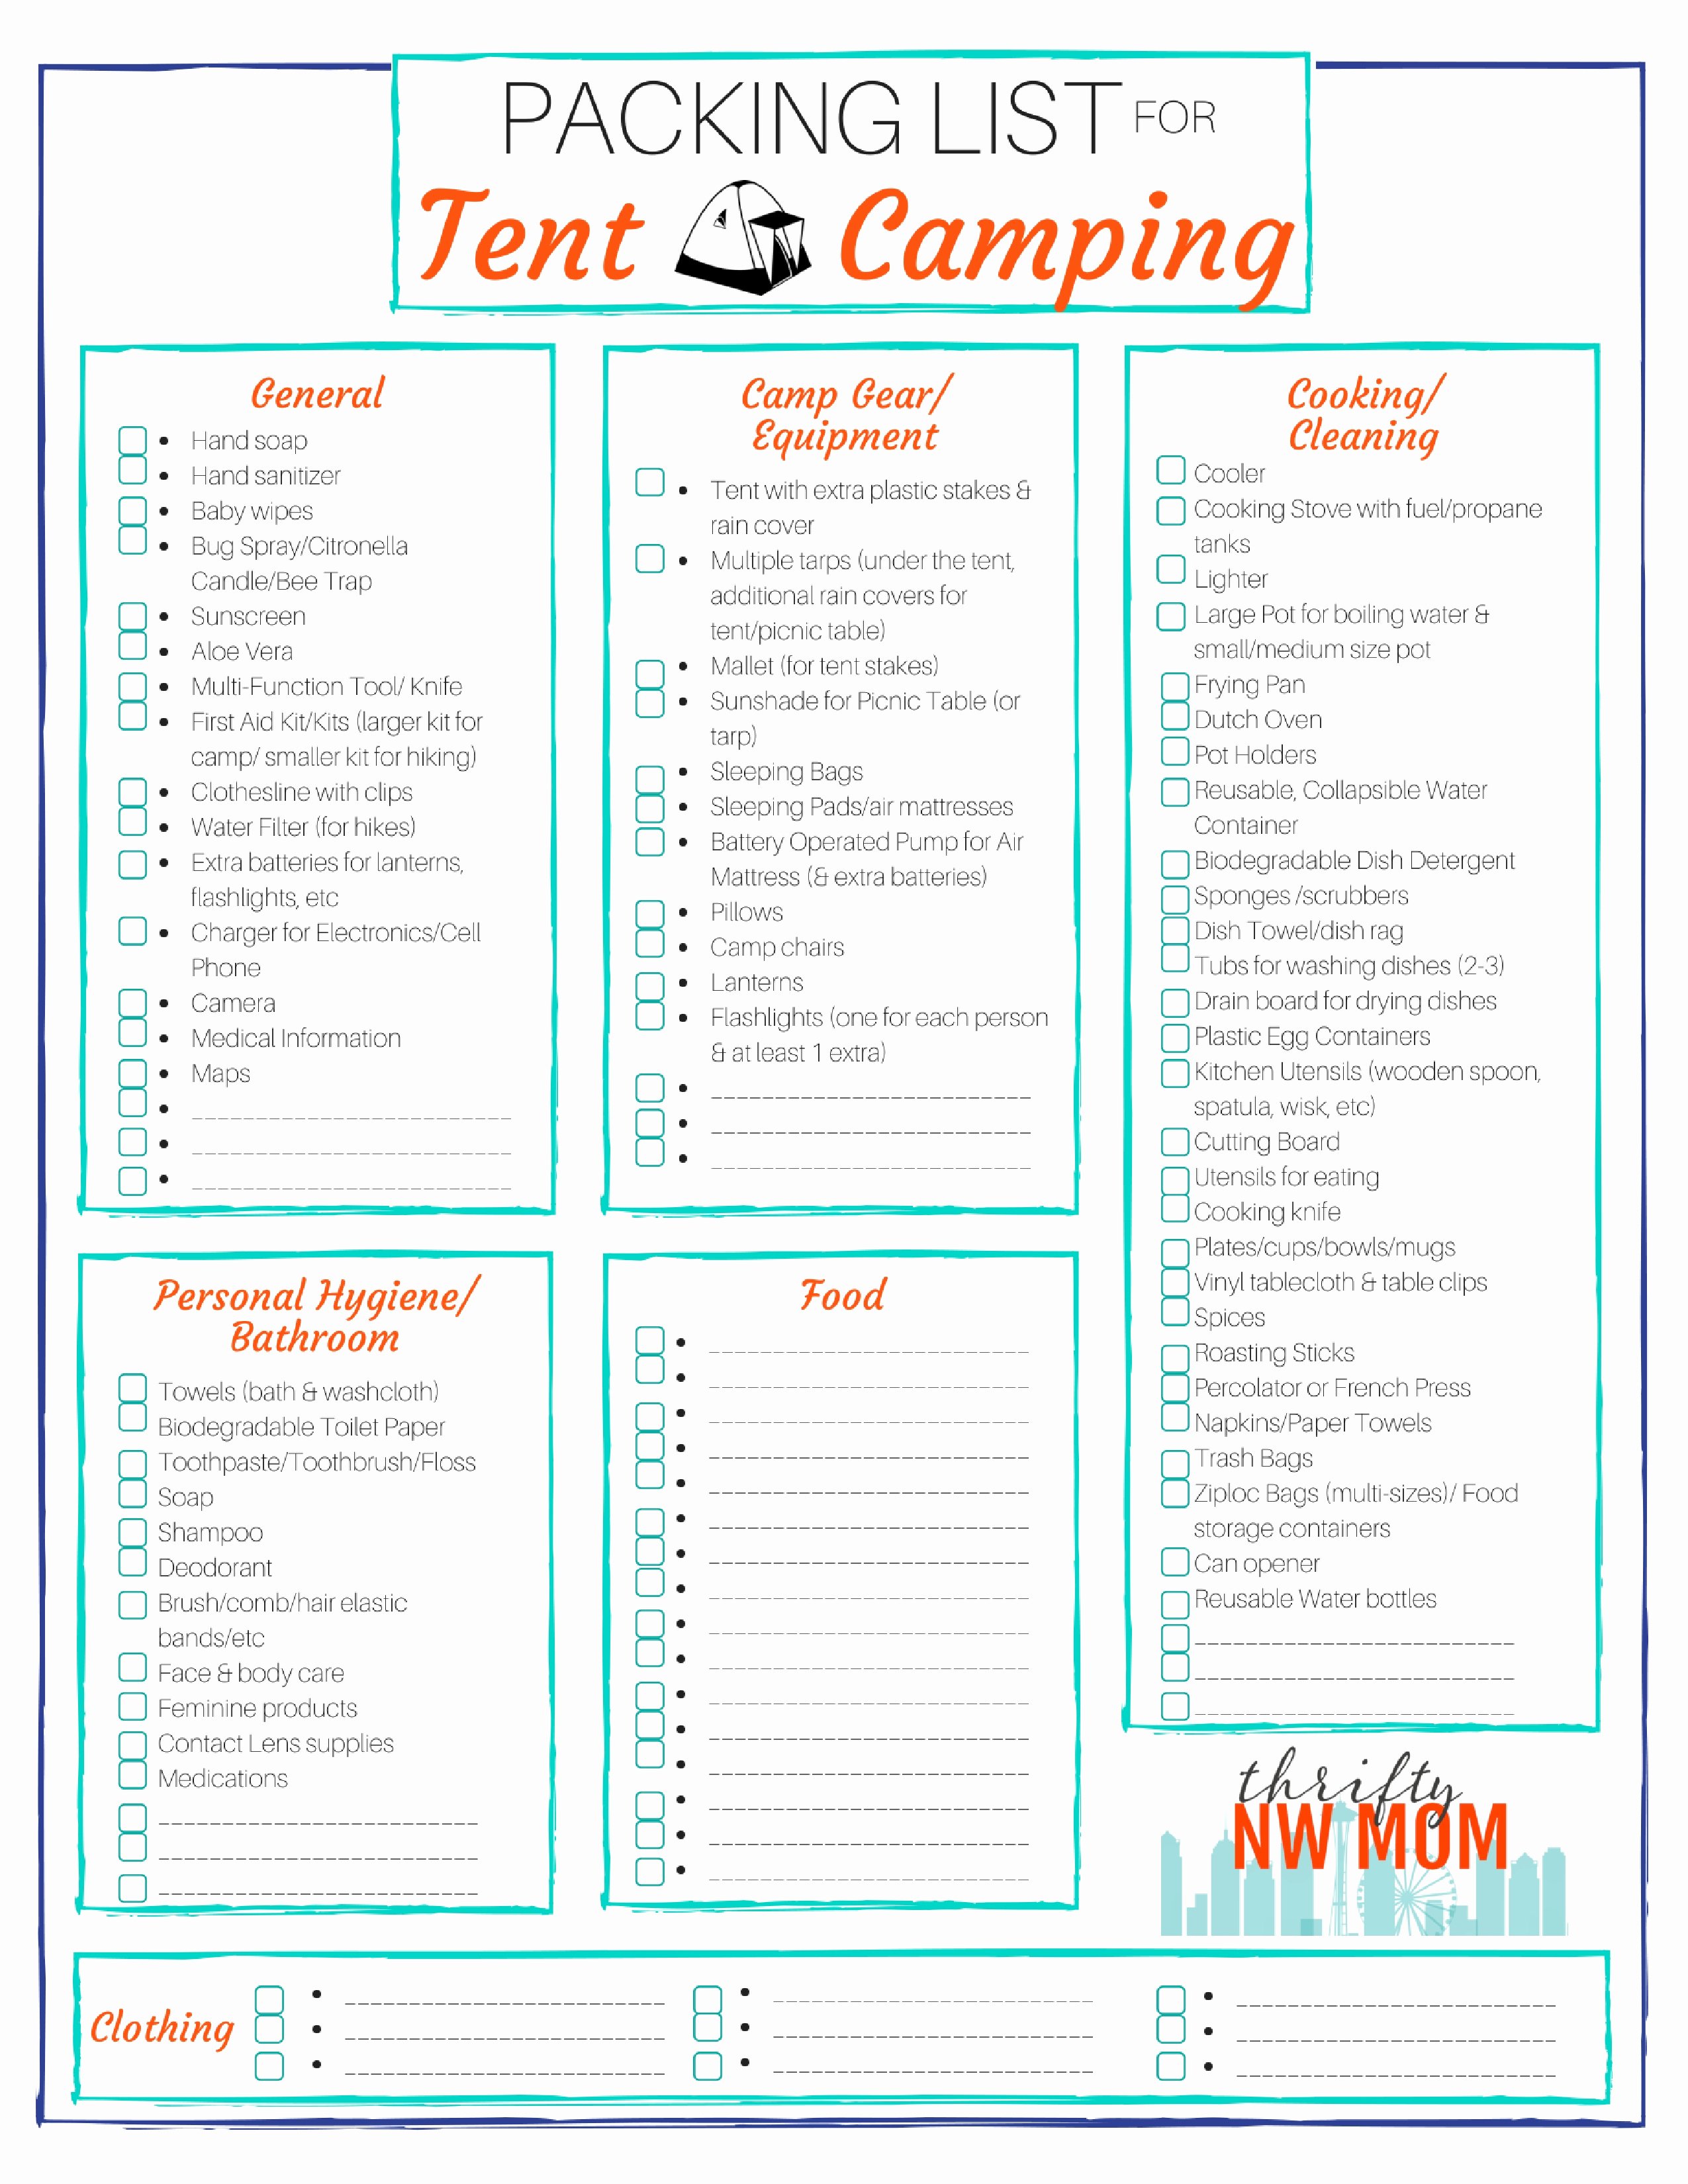 Blank Packing List Elegant Packing List for Tent Camping Free Printable Thrifty